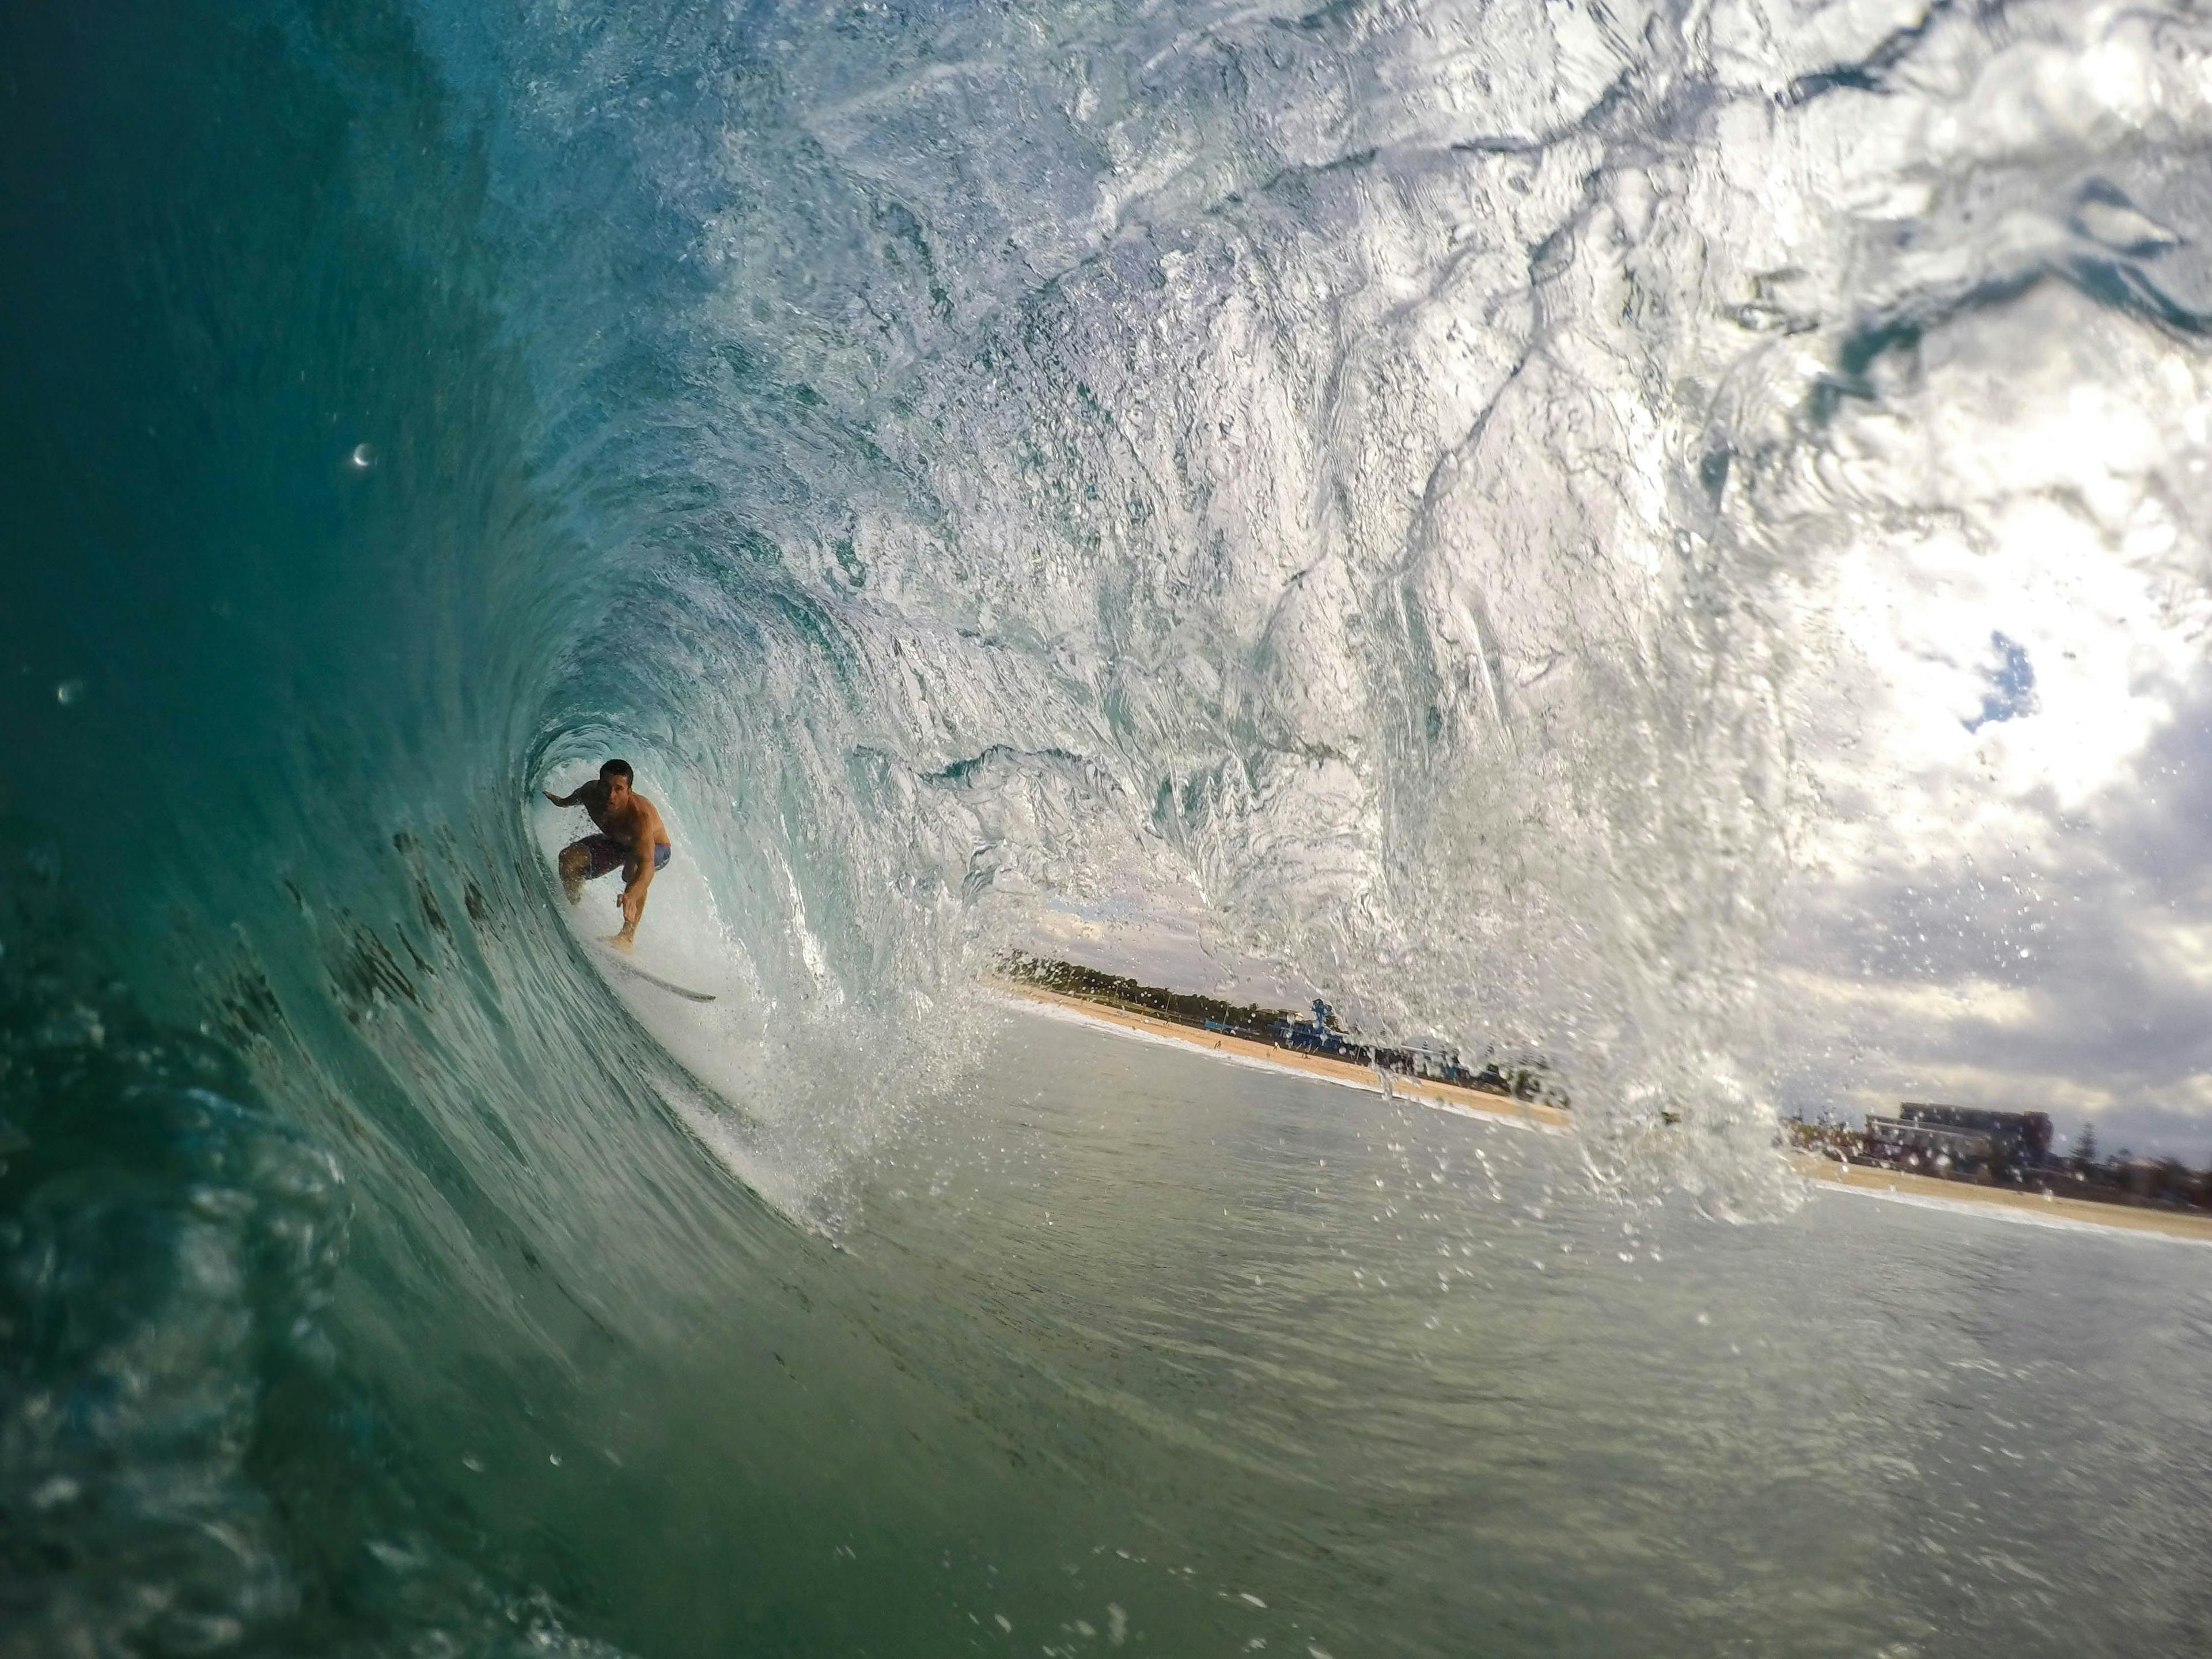 Man surfing the waves in Bali